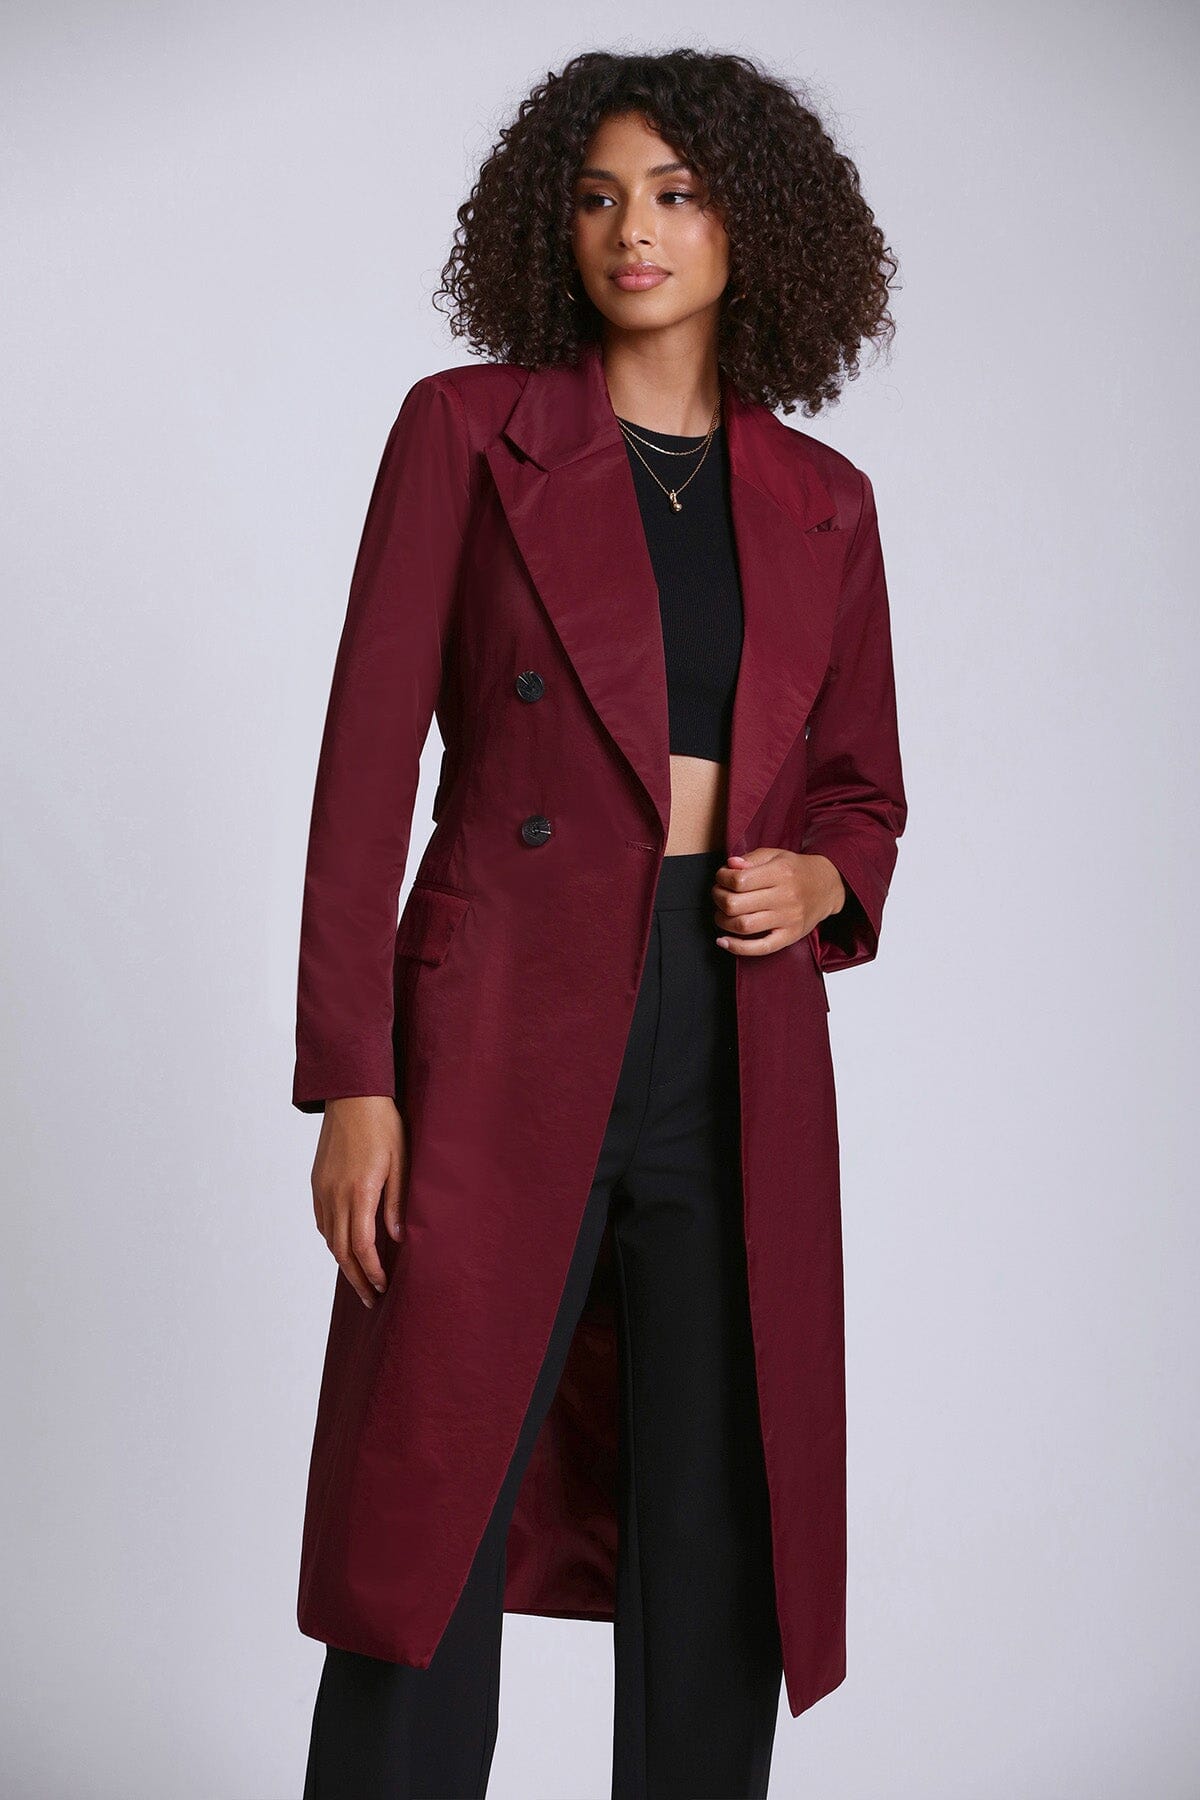 stretch cotton belted trench coat jacket burgundy red - figure flattering designer fashion day to night coats jackets for women